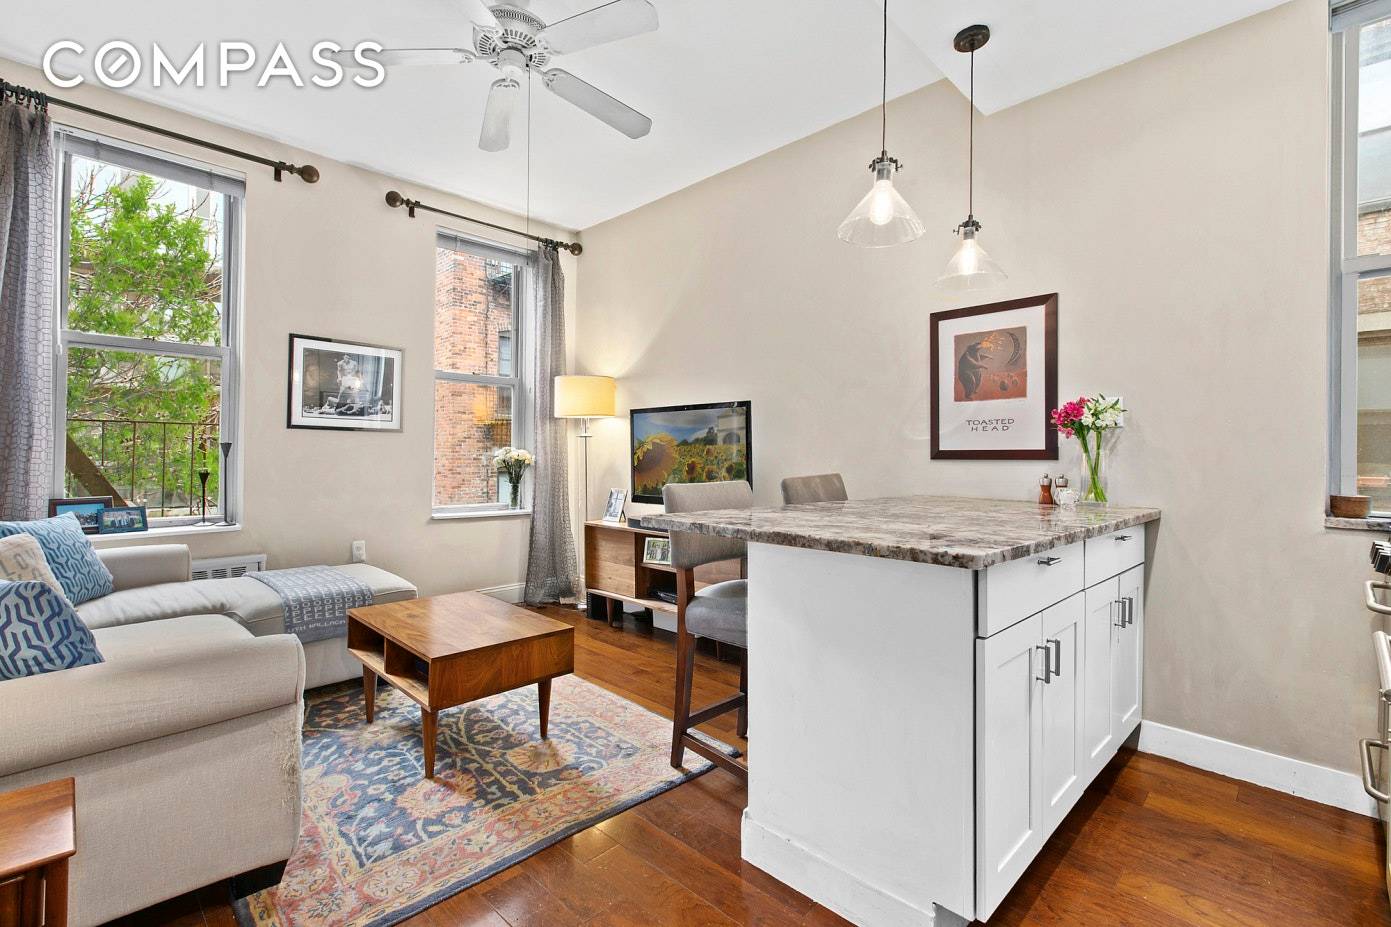 A charming and sun bathed two bedroom home with three exposures on a beautiful, tree lined block in the heart of Hell's Kitchen.